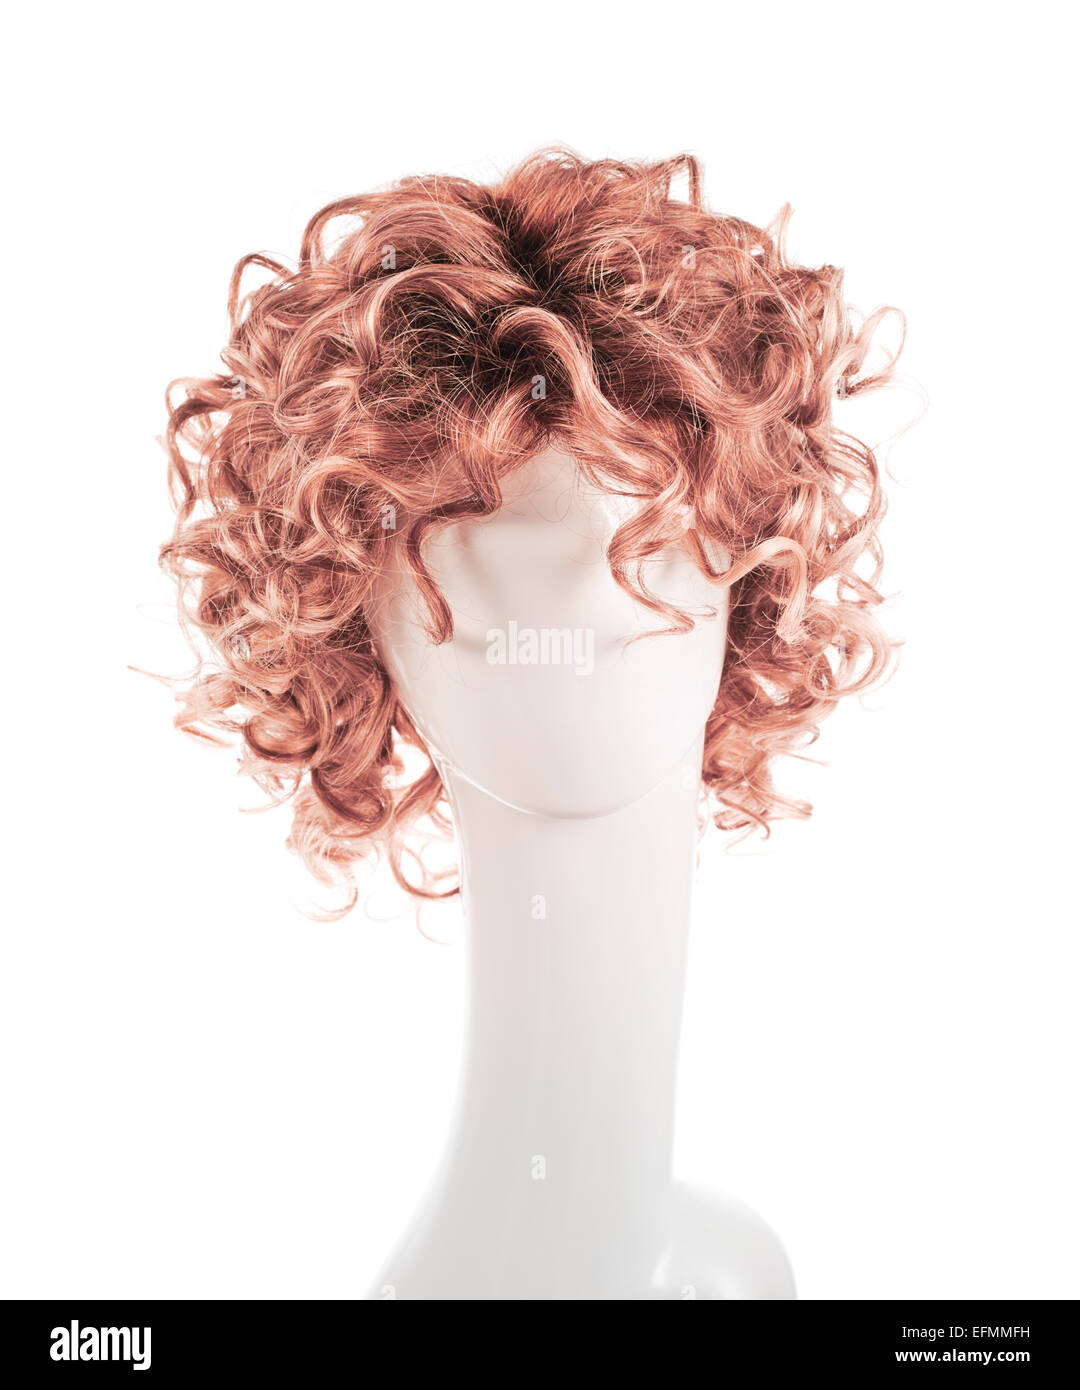 Natural Looking Pink Blonde Wig White Mannequin Head Long Hair Stock Photo  by ©amixstudio 673216514